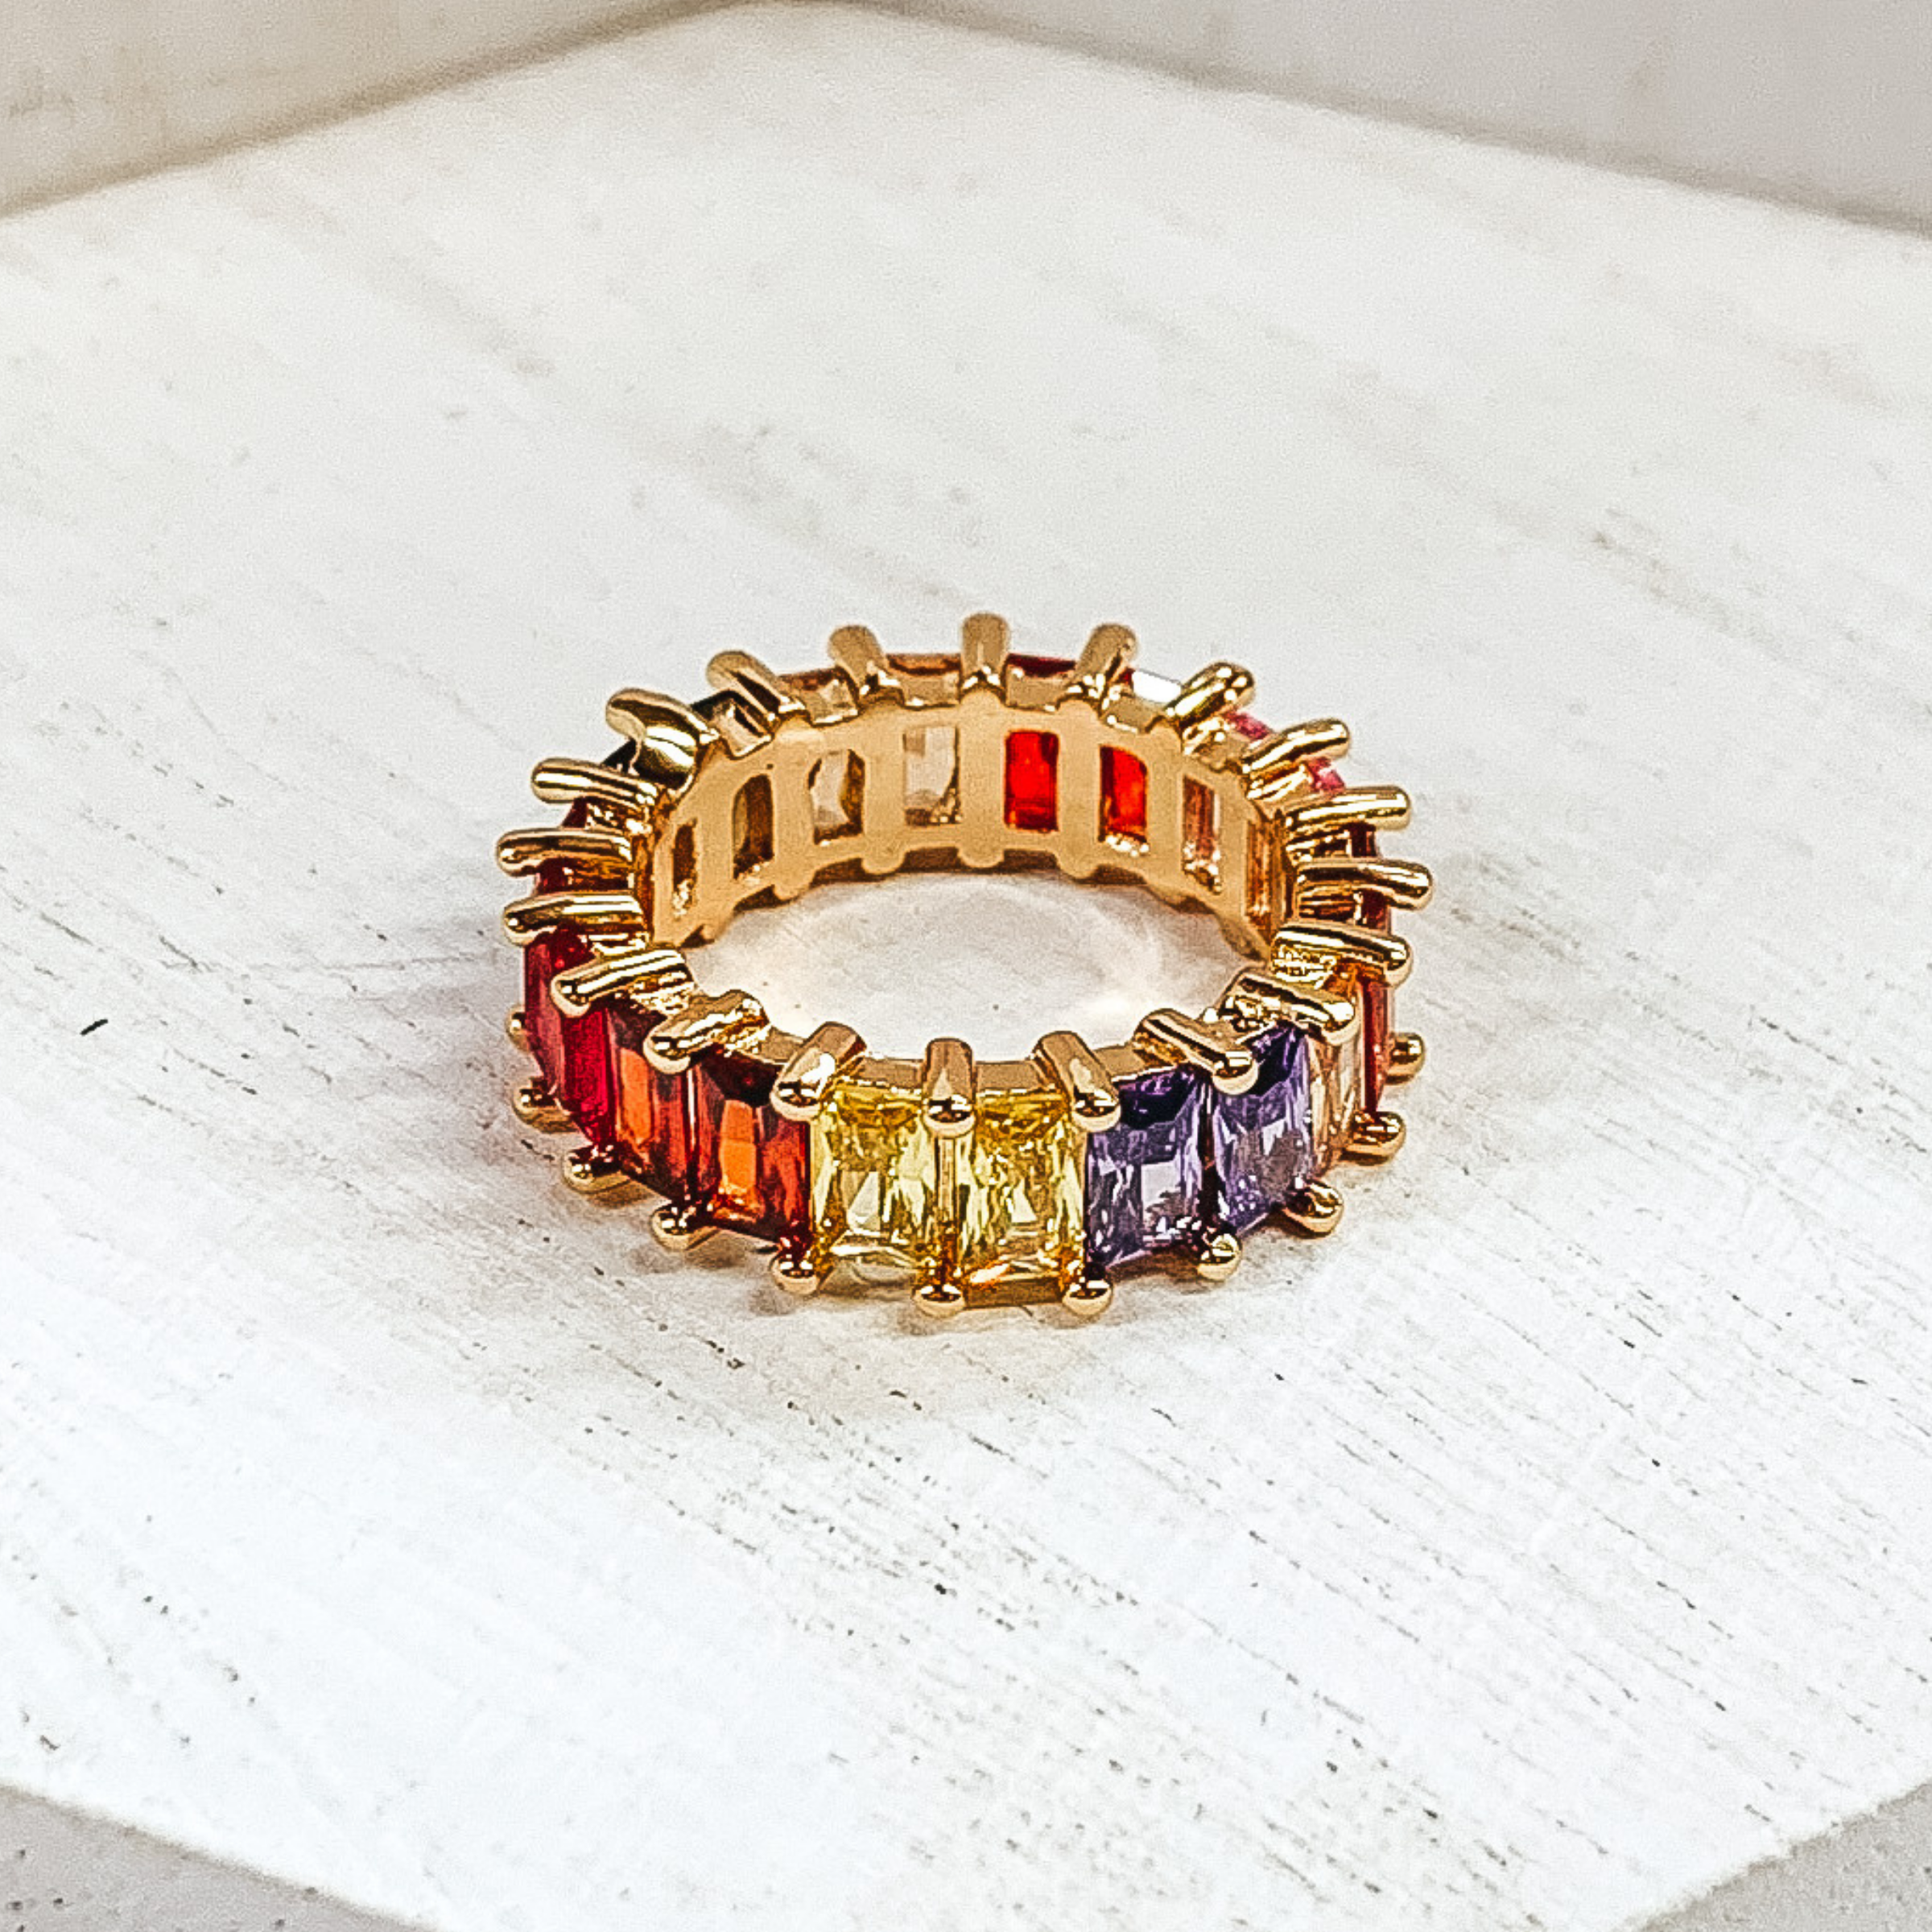 Gold Tone Ring with Baguette Crystals in Garnet Multicolored - Giddy Up Glamour Boutique